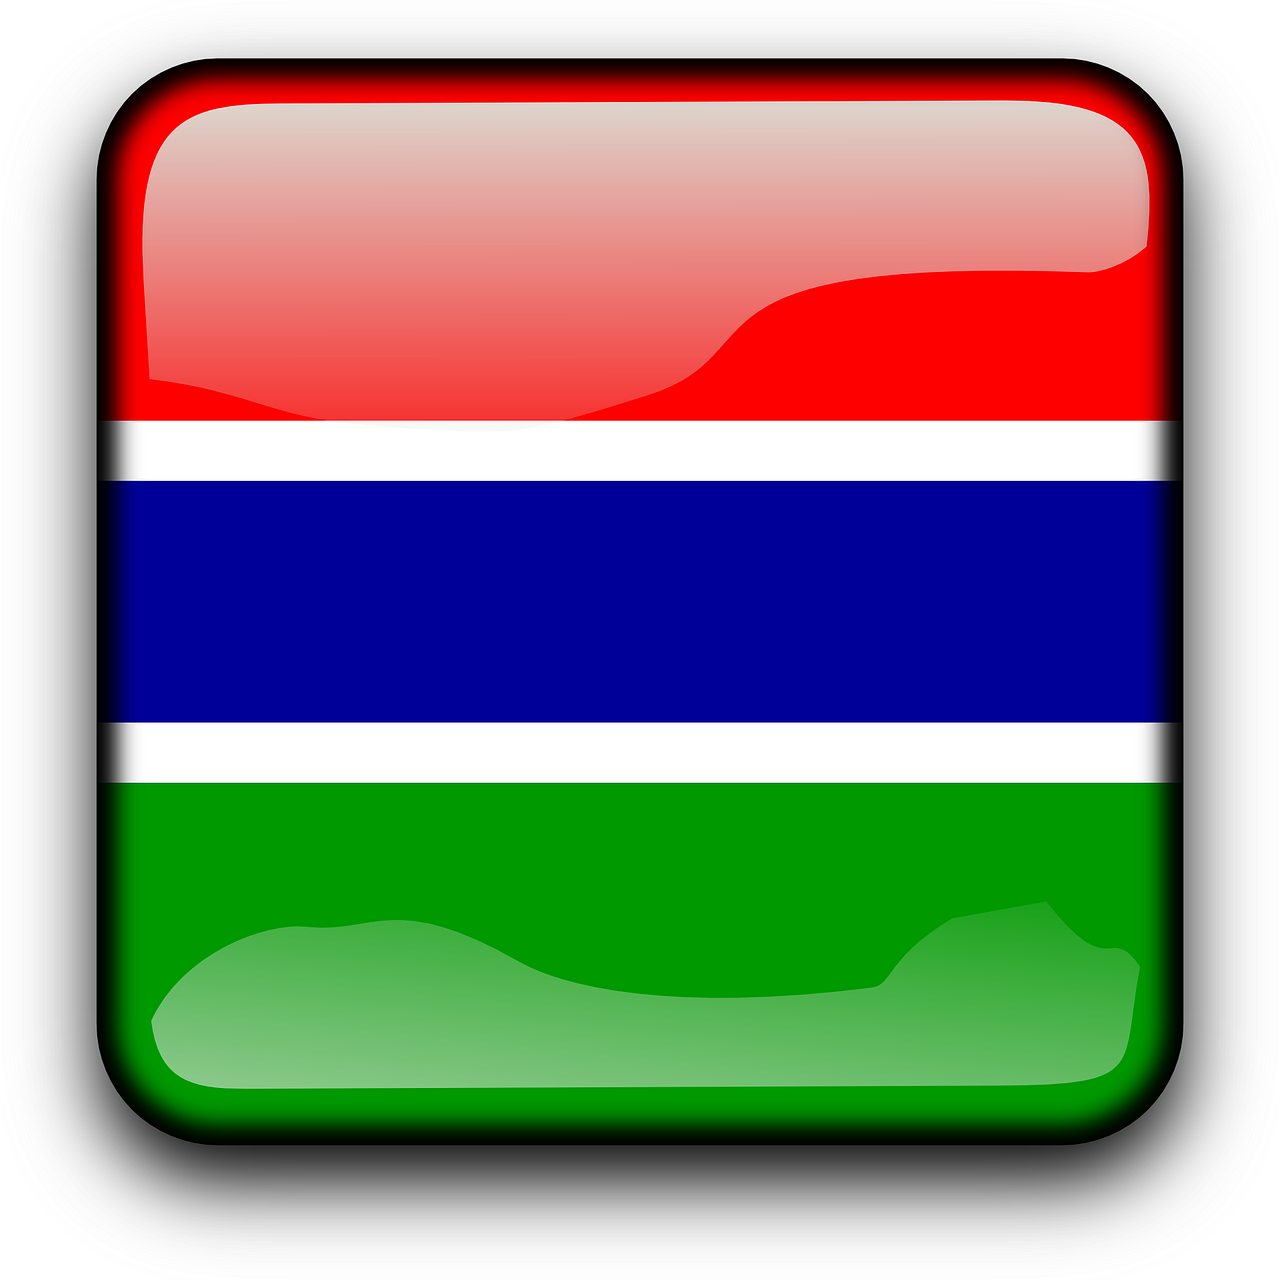 gambia,flag,country,nationality,square,button,glossy,free vector graphics,free pictures, free photos, free images, royalty free, free illustrations, public domain